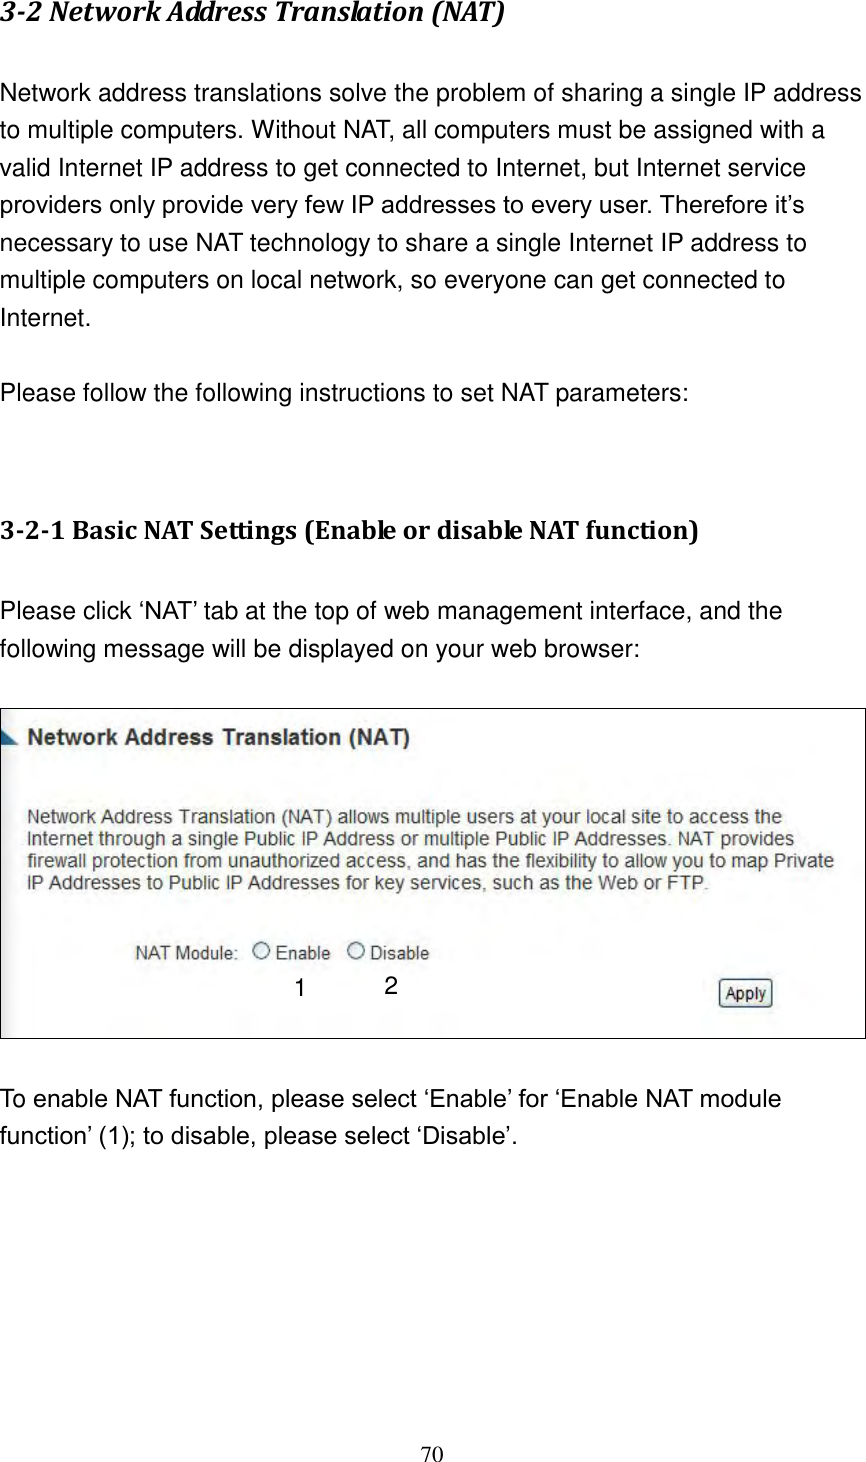 70 3-2 Network Address Translation (NAT)  Network address translations solve the problem of sharing a single IP address to multiple computers. Without NAT, all computers must be assigned with a valid Internet IP address to get connected to Internet, but Internet service providers only provide very few IP addresses to every user. Therefore it‟s necessary to use NAT technology to share a single Internet IP address to multiple computers on local network, so everyone can get connected to Internet.    Please follow the following instructions to set NAT parameters:   3-2-1 Basic NAT Settings (Enable or disable NAT function)  Please click „NAT‟ tab at the top of web management interface, and the following message will be displayed on your web browser:    To enable NAT function, please select „Enable‟ for „Enable NAT module function‟ (1); to disable, please select „Disable‟.        2 1 